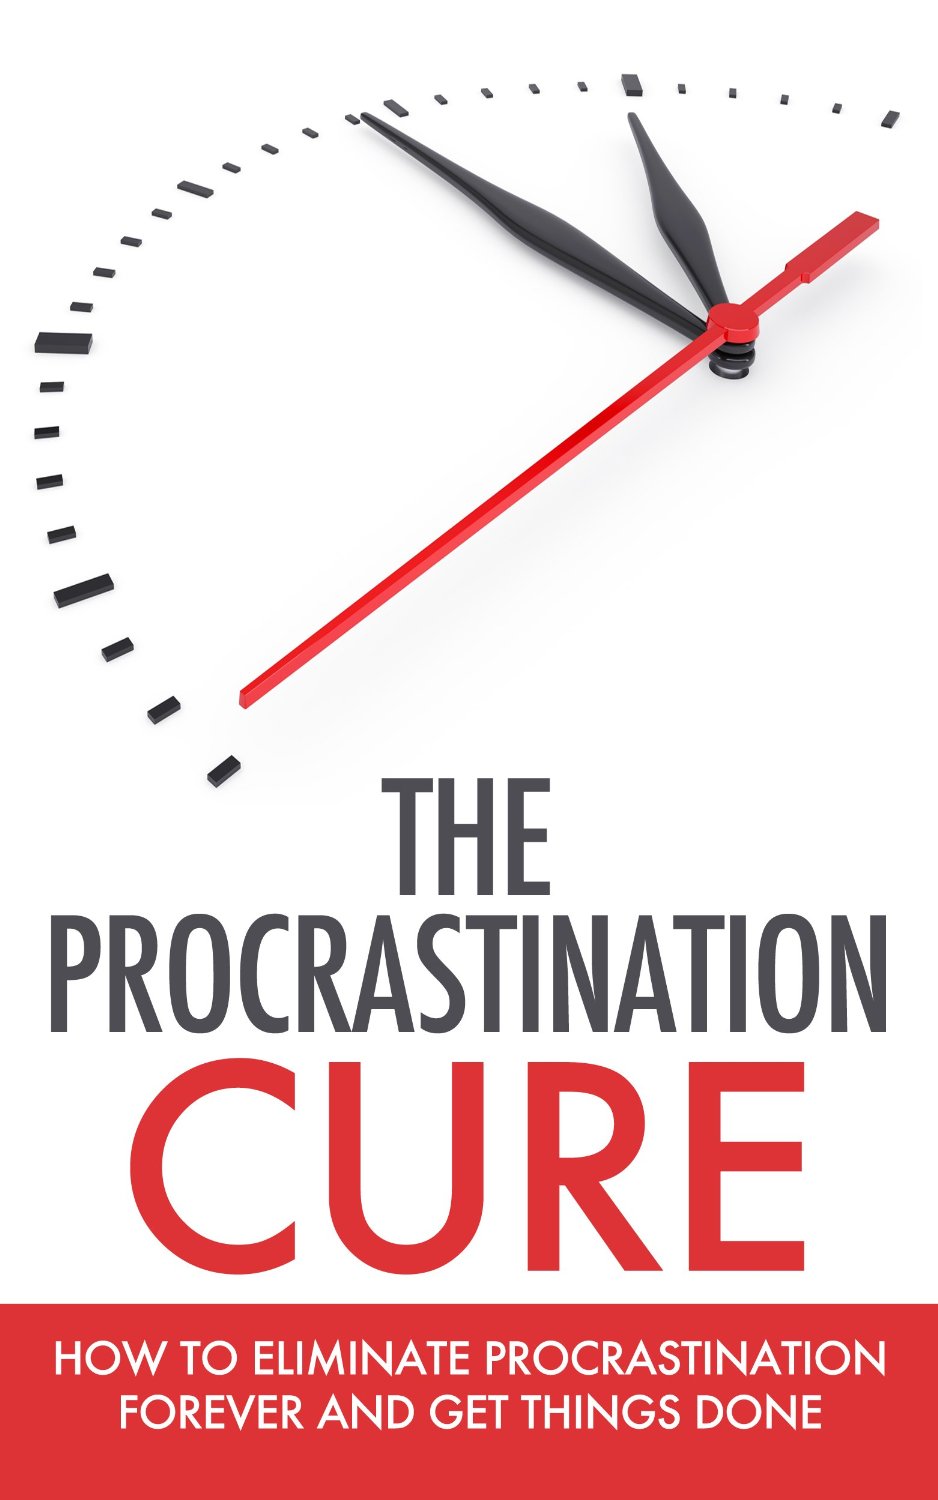 The Procrastination Cure by William D. Edwards